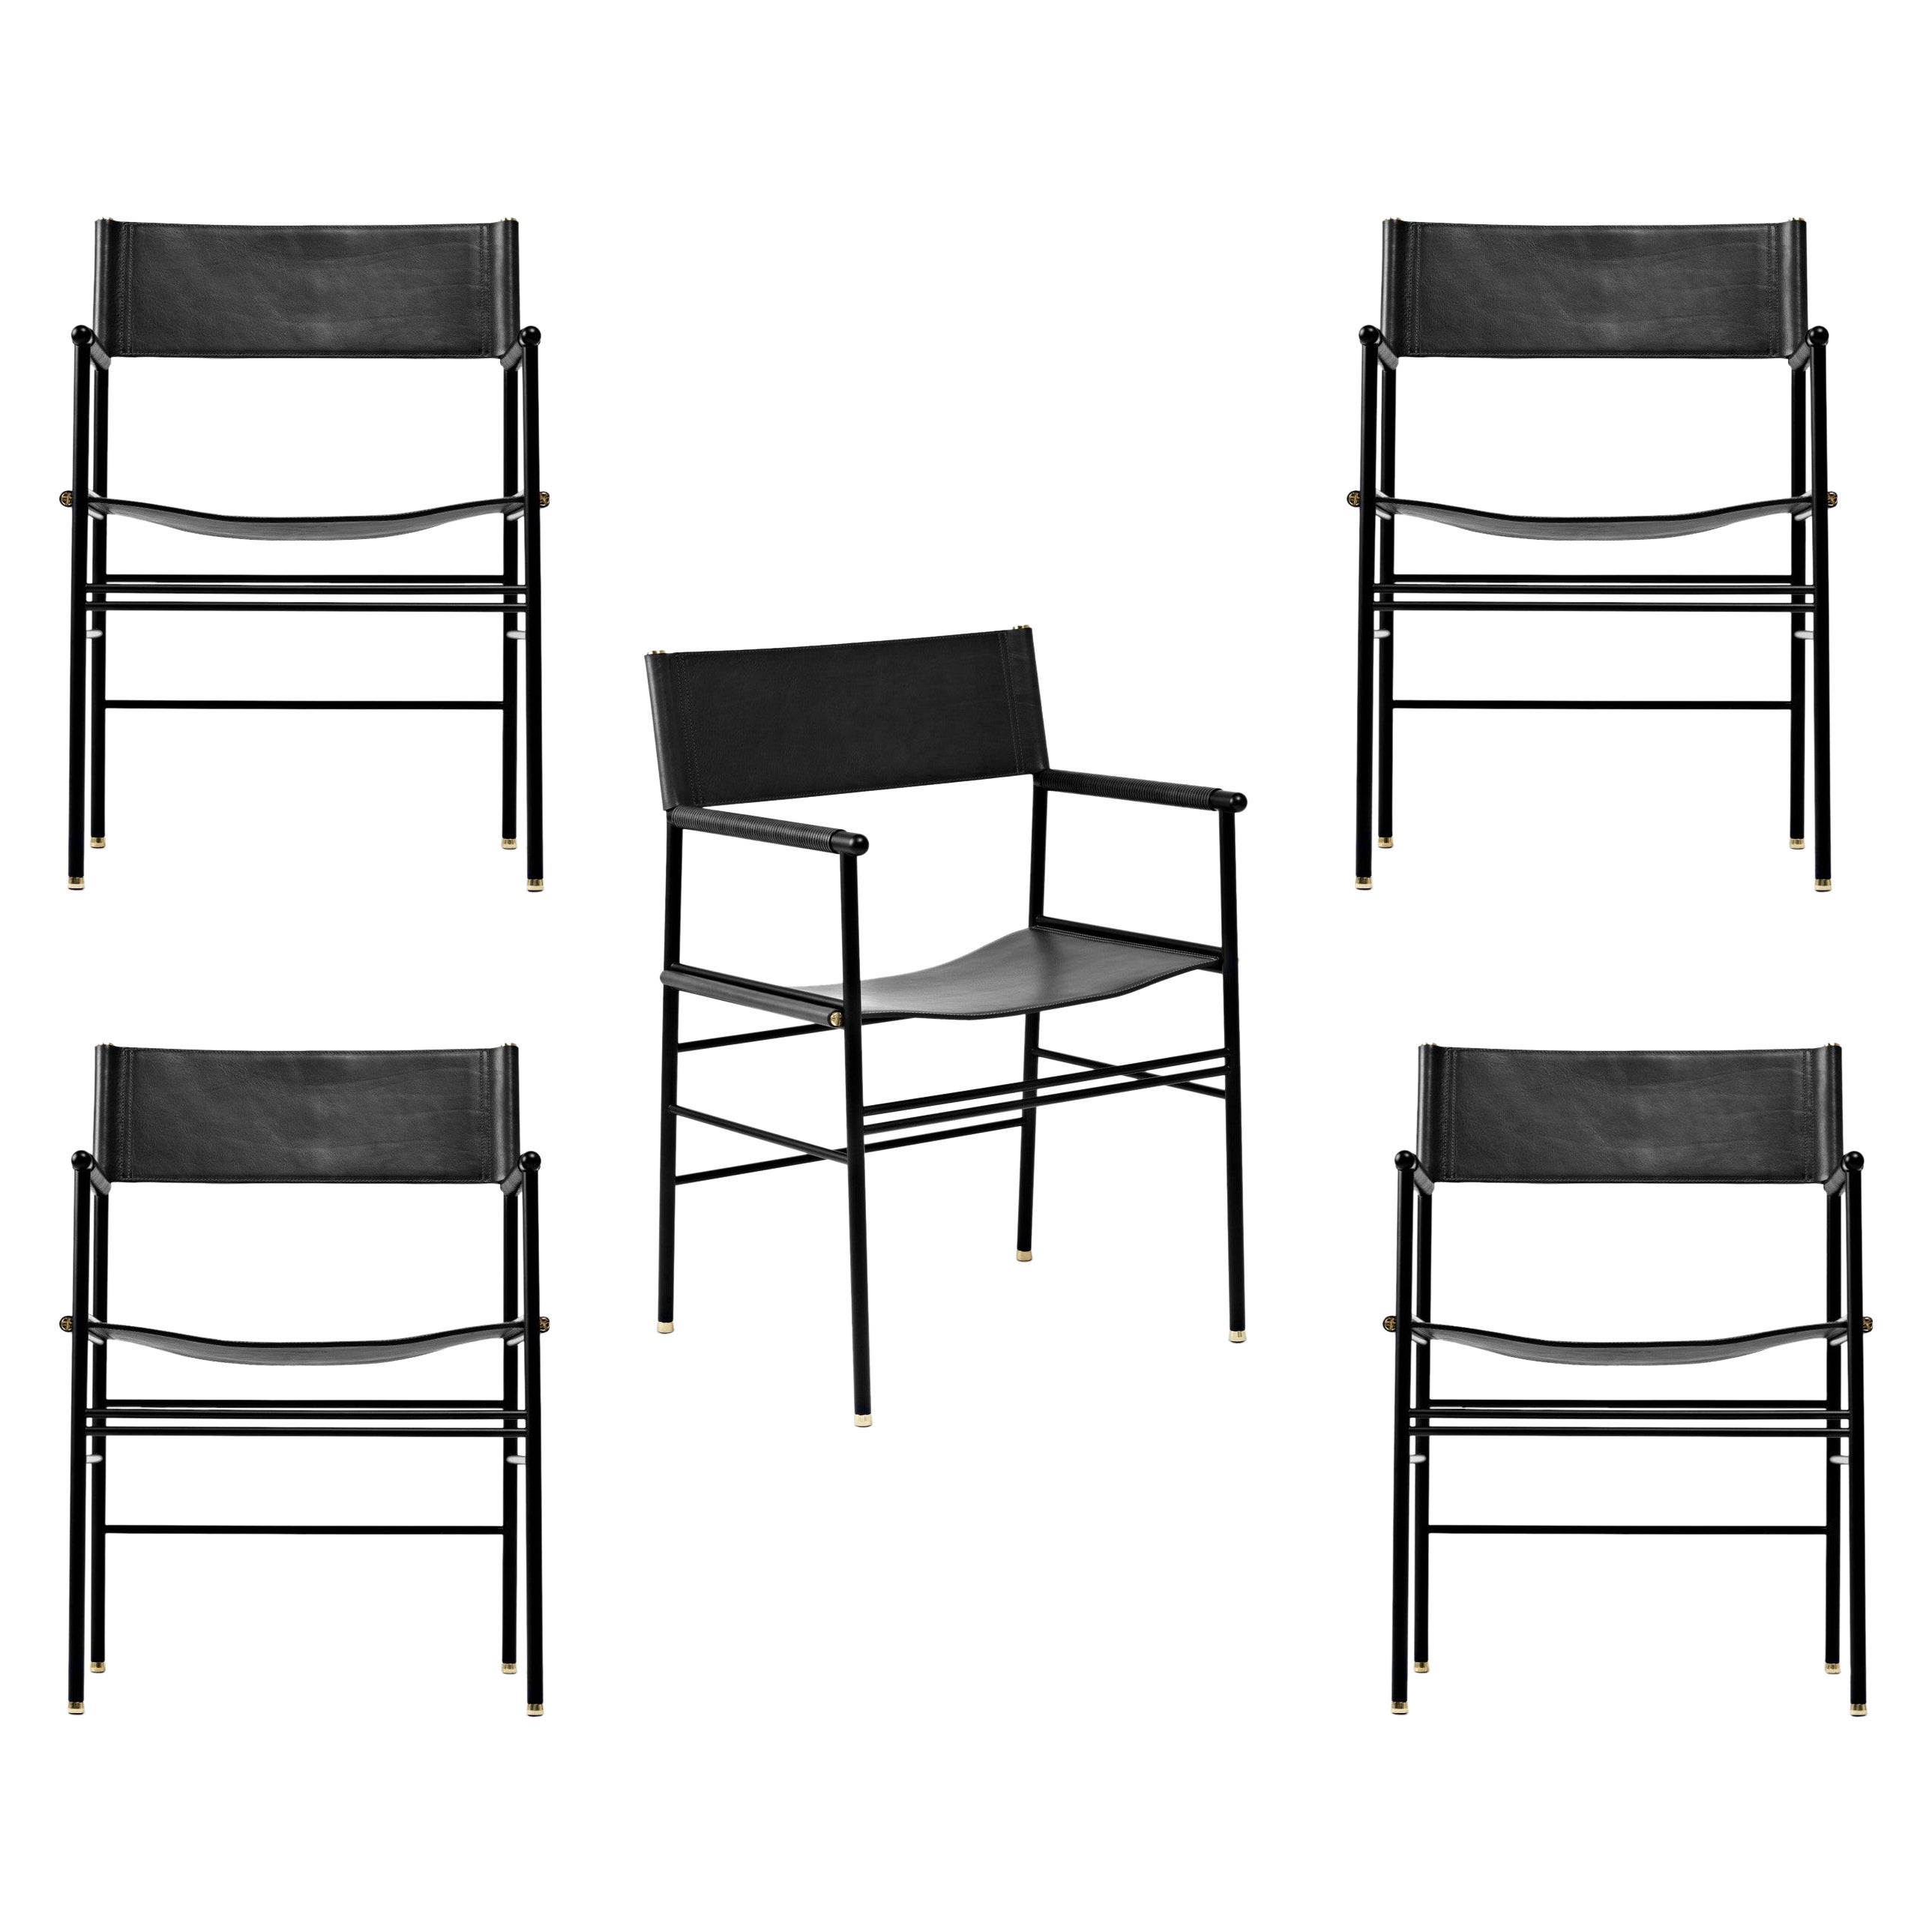 Set of 5 Artisanal Contemporary Chair Black Leather & Black Rubber Metal For Sale